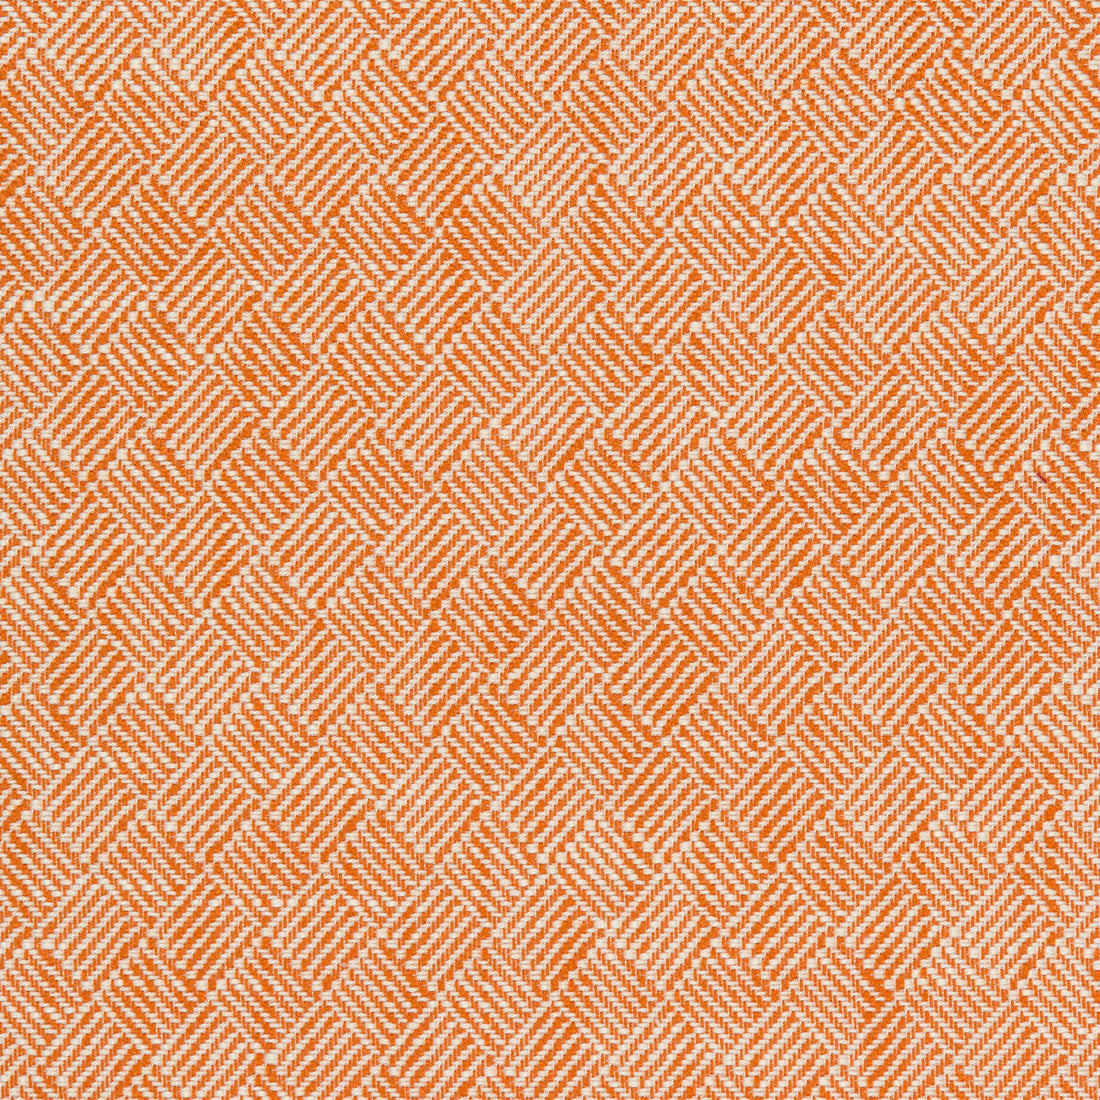 Kravet Design fabric in 36088-12 color - pattern 36088.12.0 - by Kravet Design in the Inside Out Performance Fabrics collection